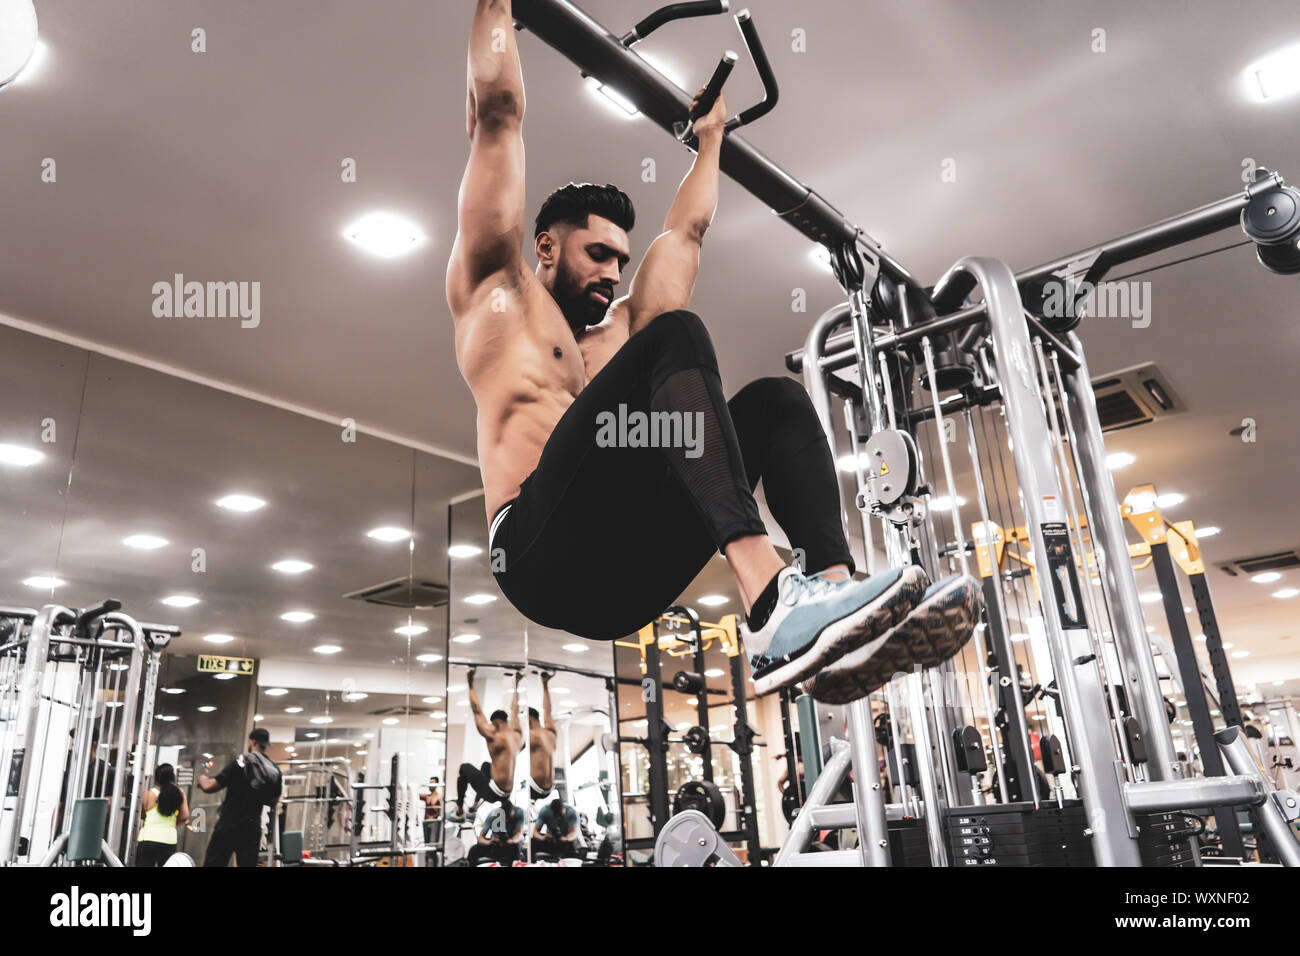 Man Athlete Doing Pull Ups - Chin-Ups In The Gym Stock Photo